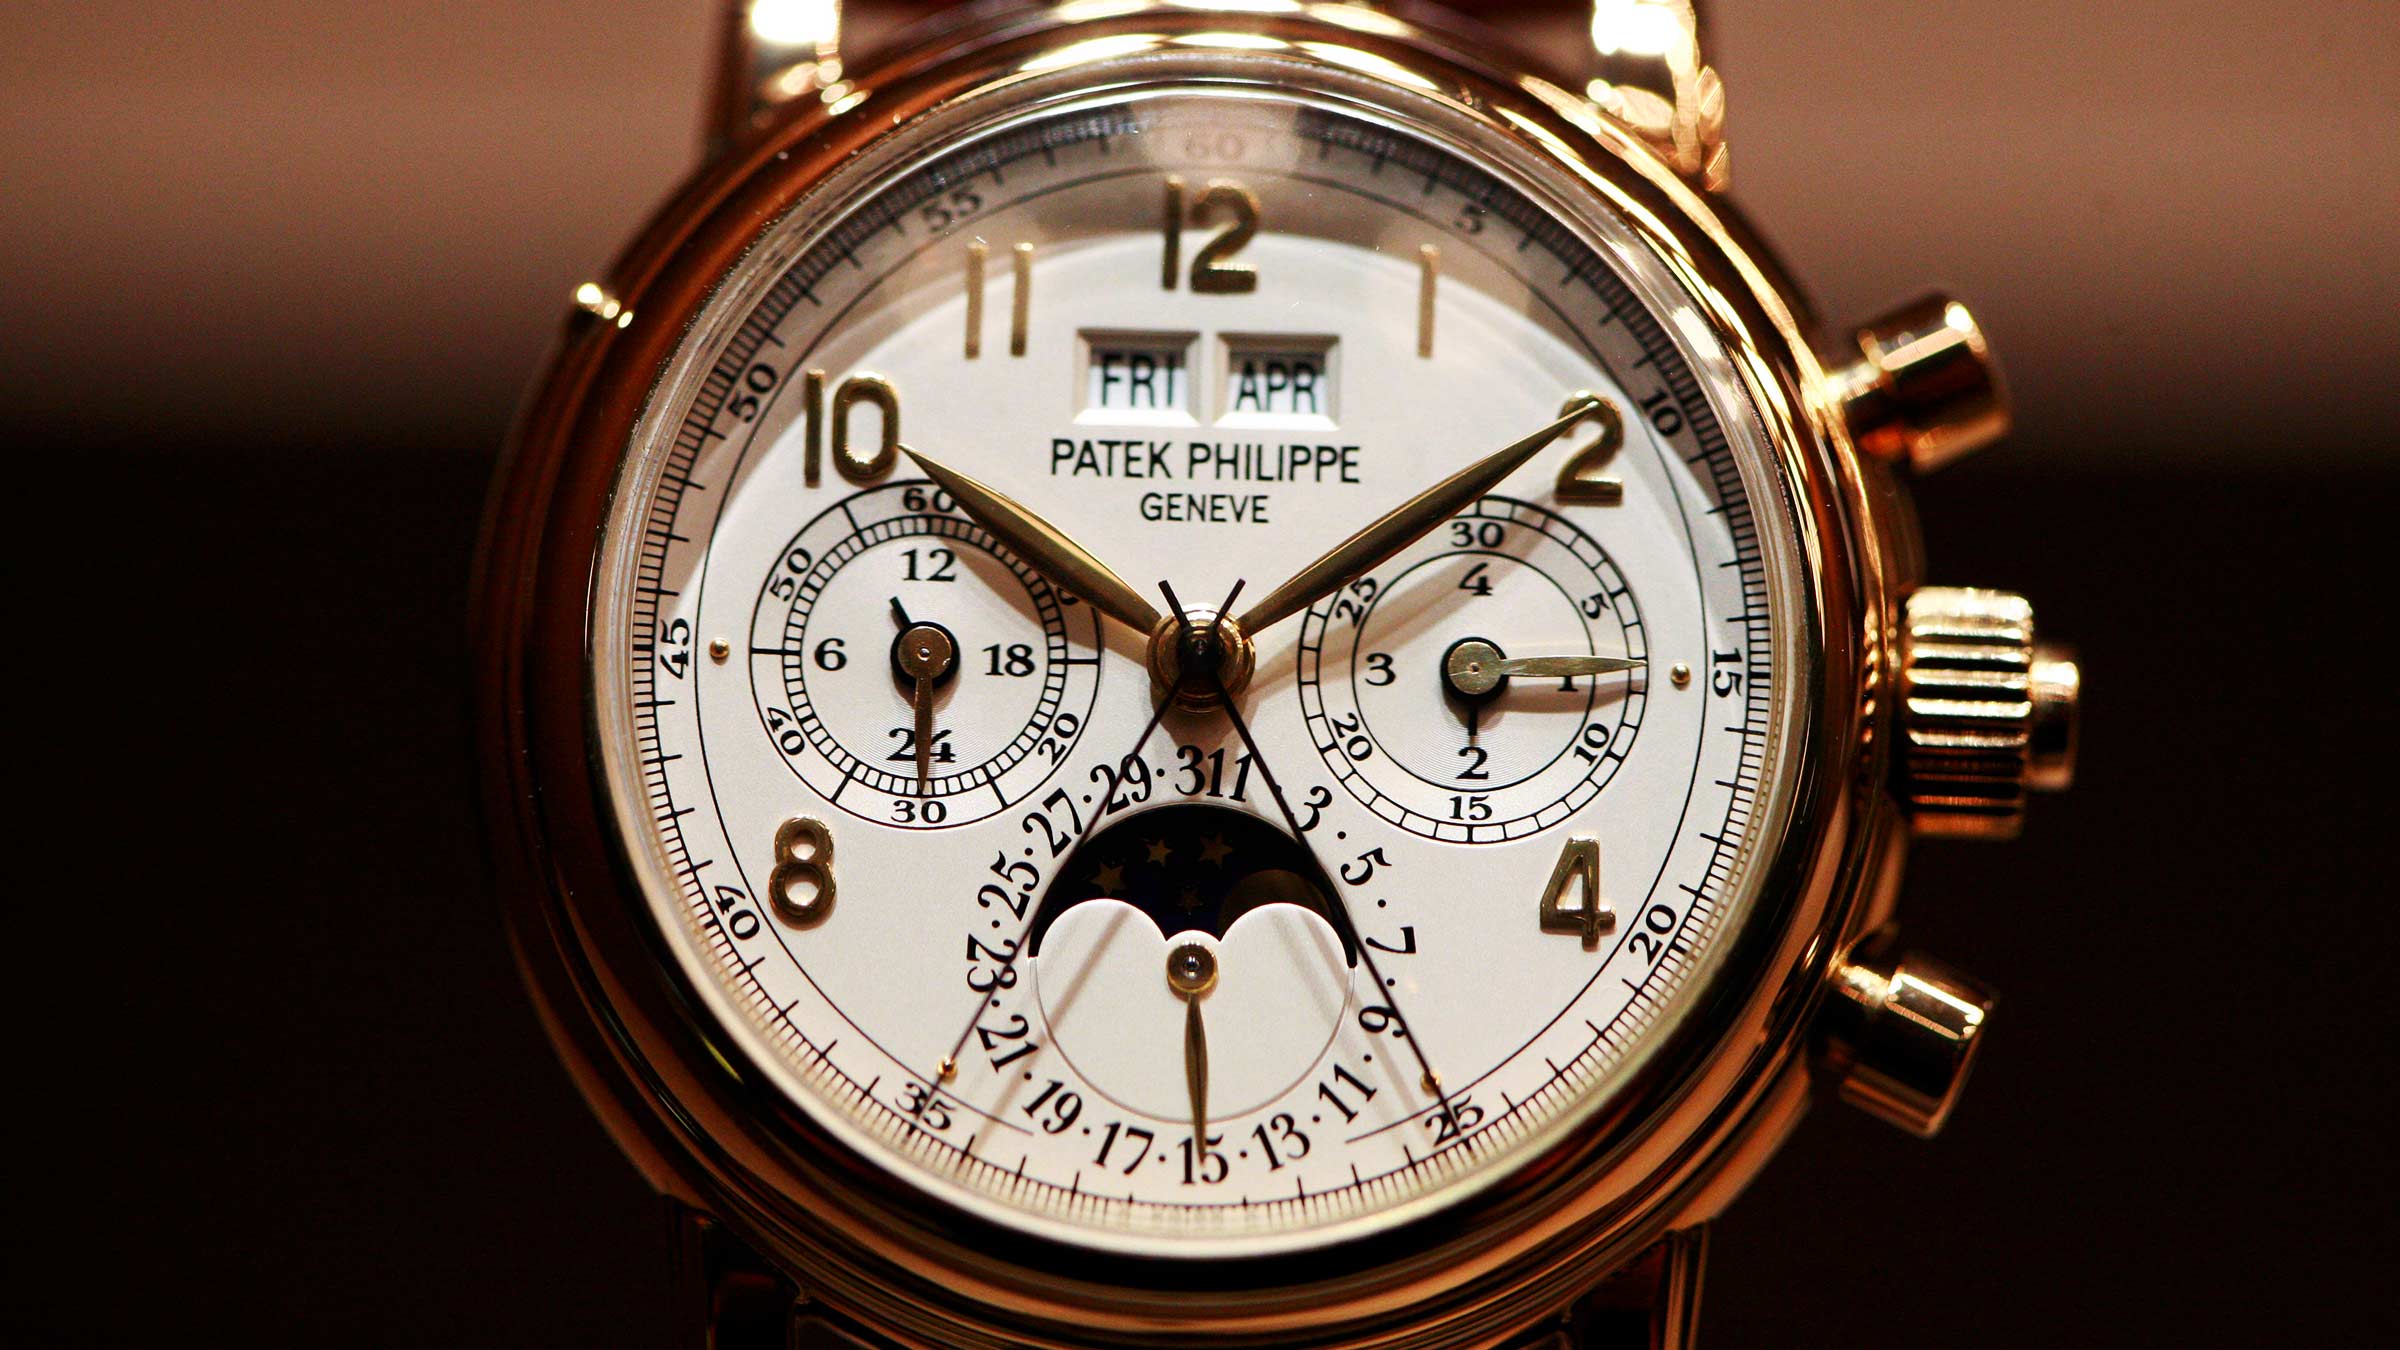 Patek Philippe The Art Of Watches Grand Exhibition